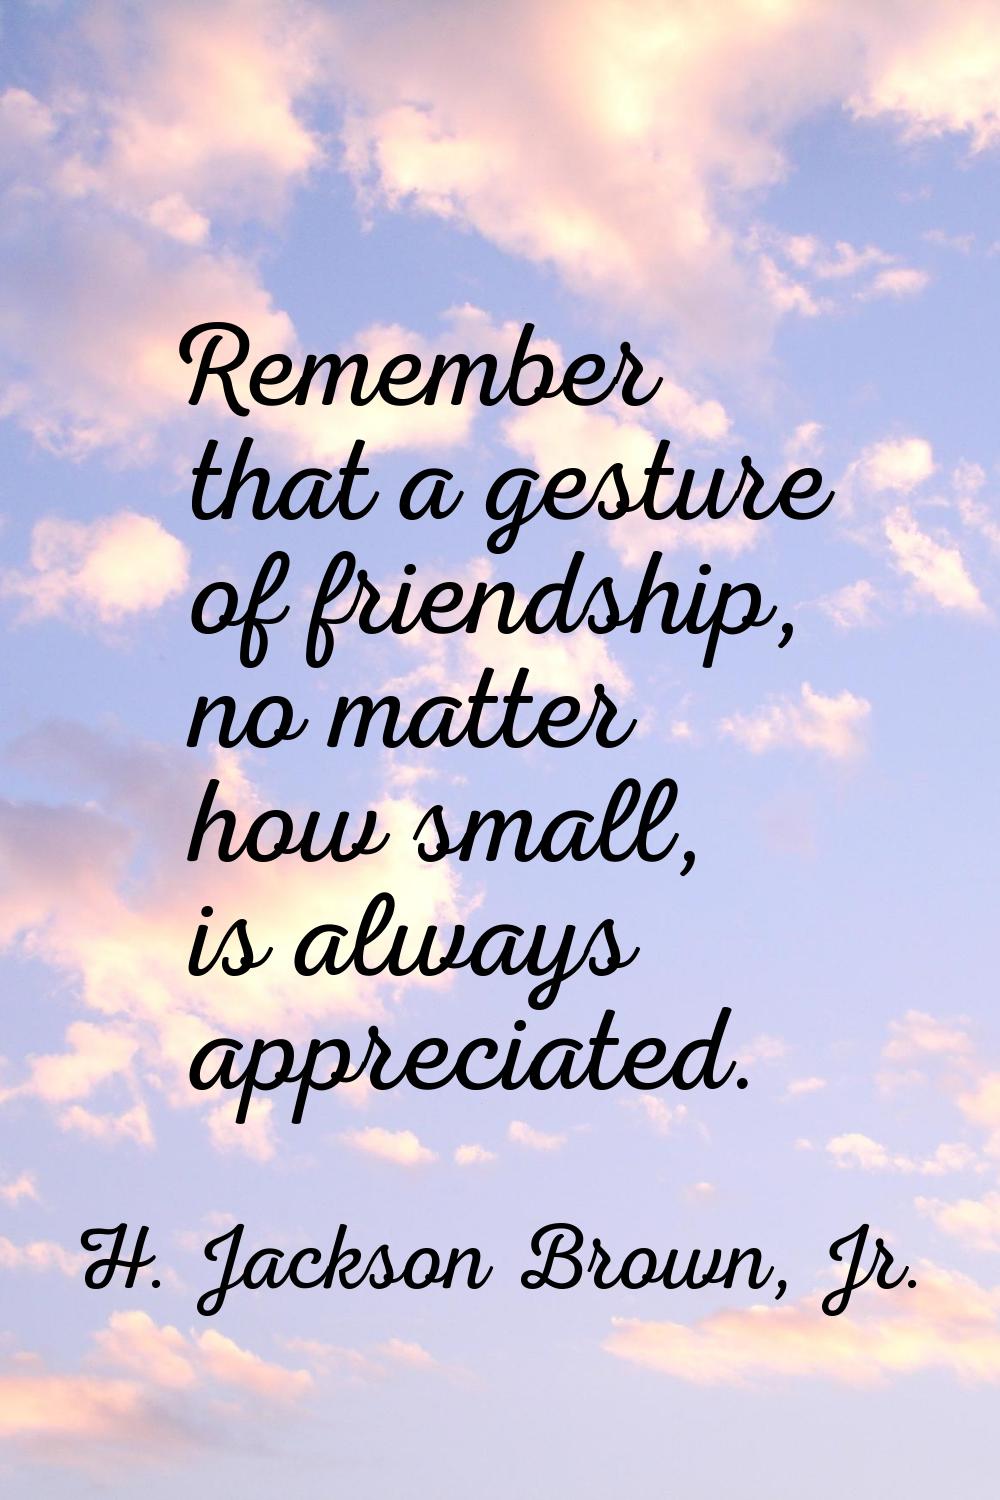 Remember that a gesture of friendship, no matter how small, is always appreciated.